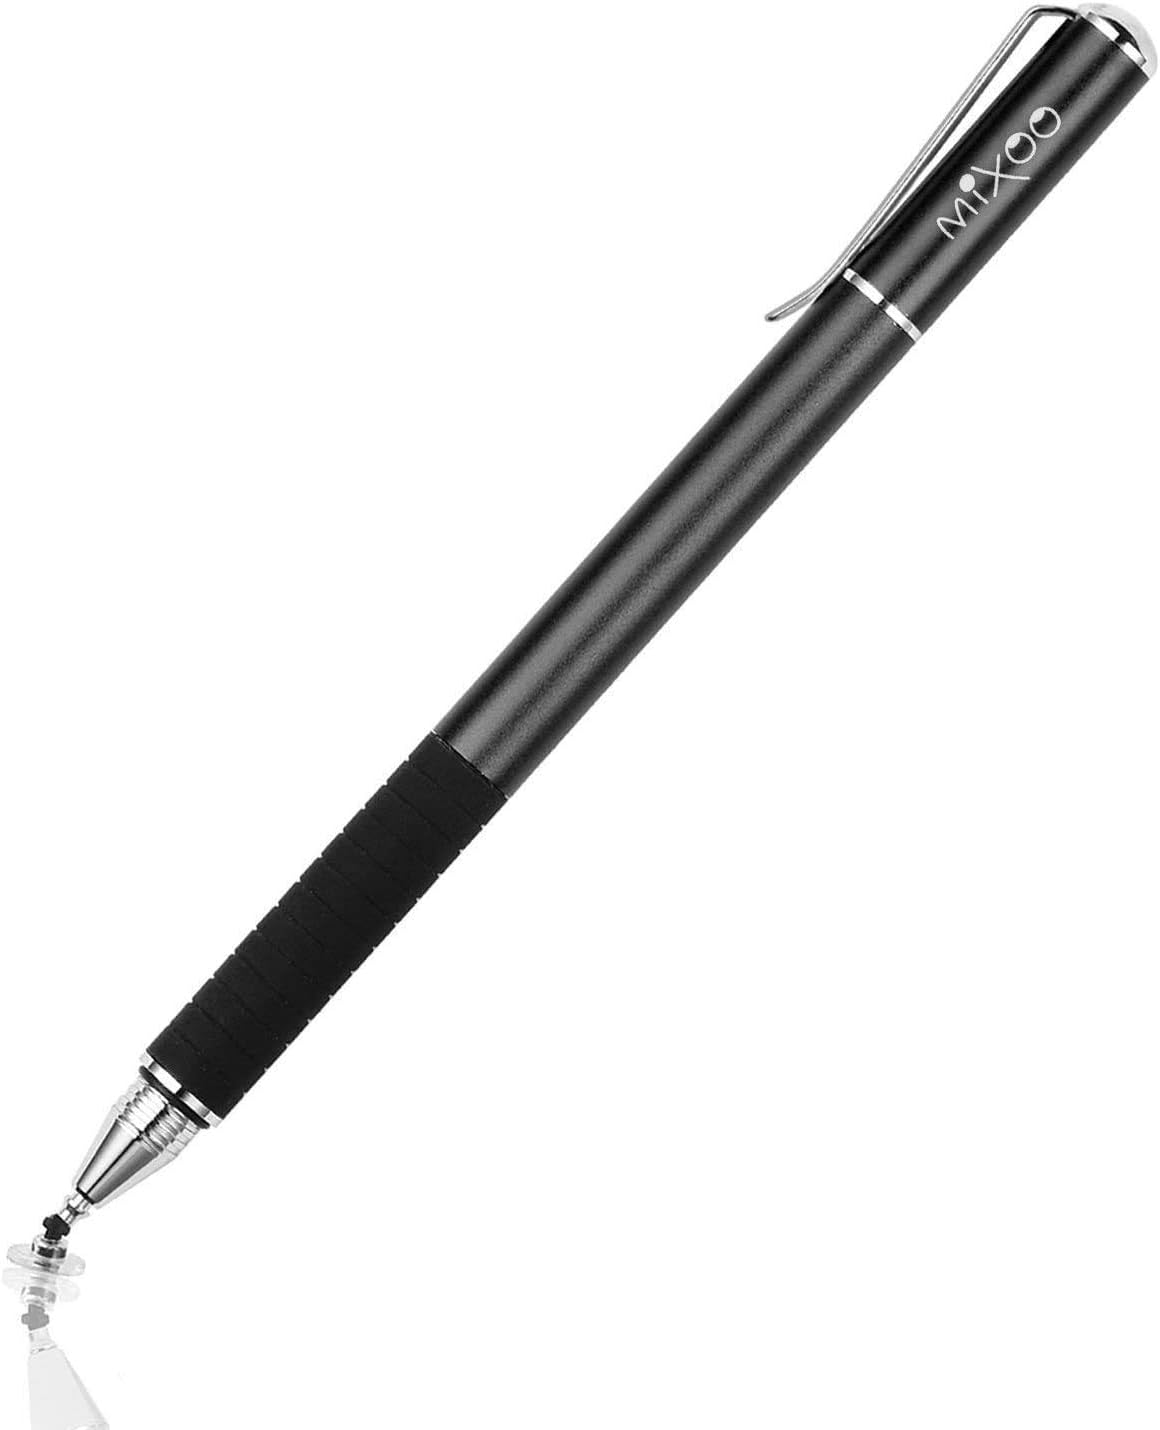 Mixoo Capacitive Stylus Pen,(Disc and Fiber Tip 2-in-1 [...]